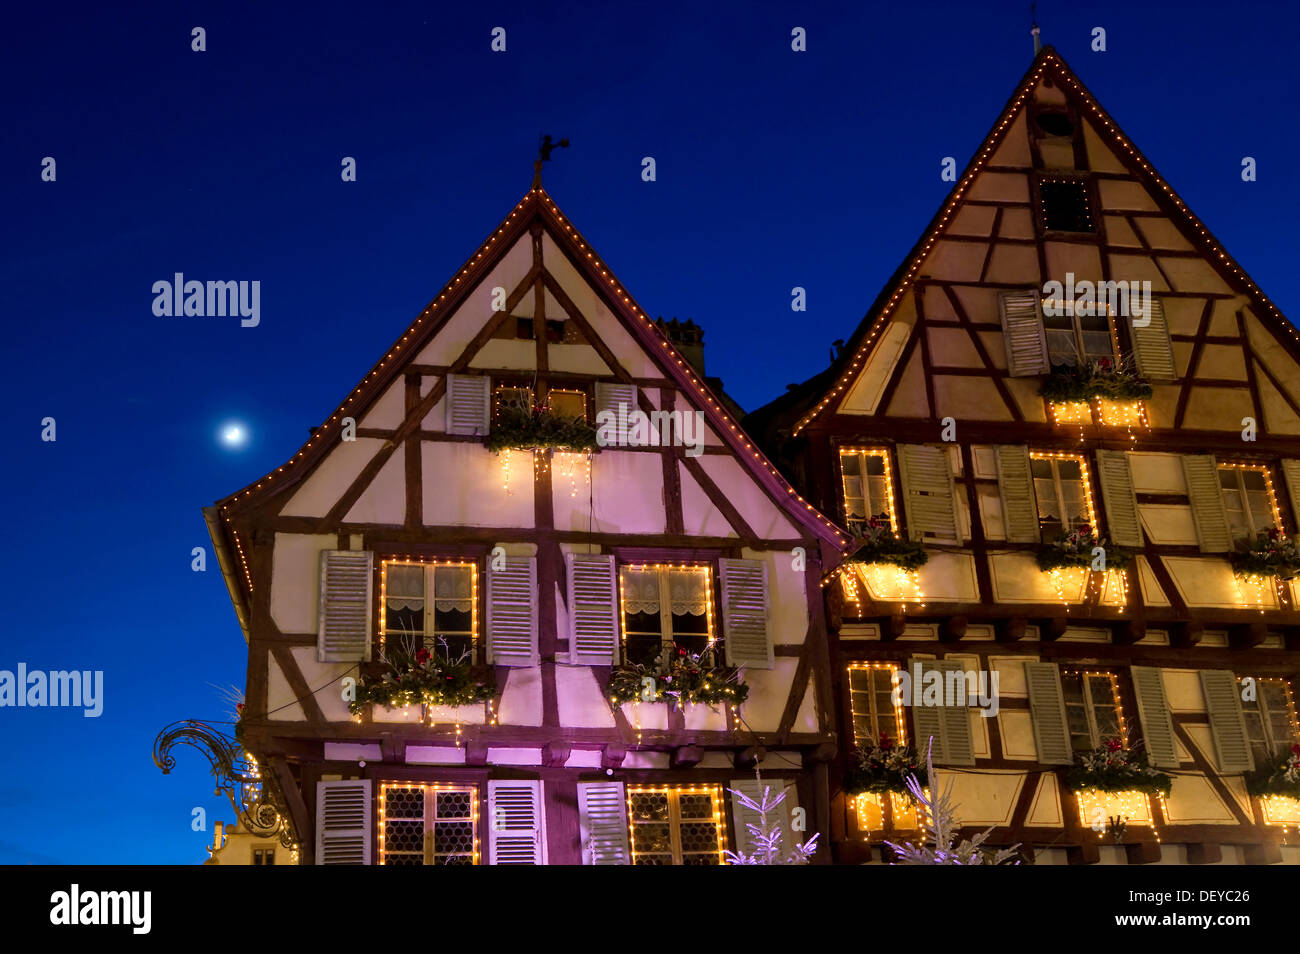 Half-timbered houses with Christmas decorations, historic district of Colmar, Alsace, France, Europe Stock Photo